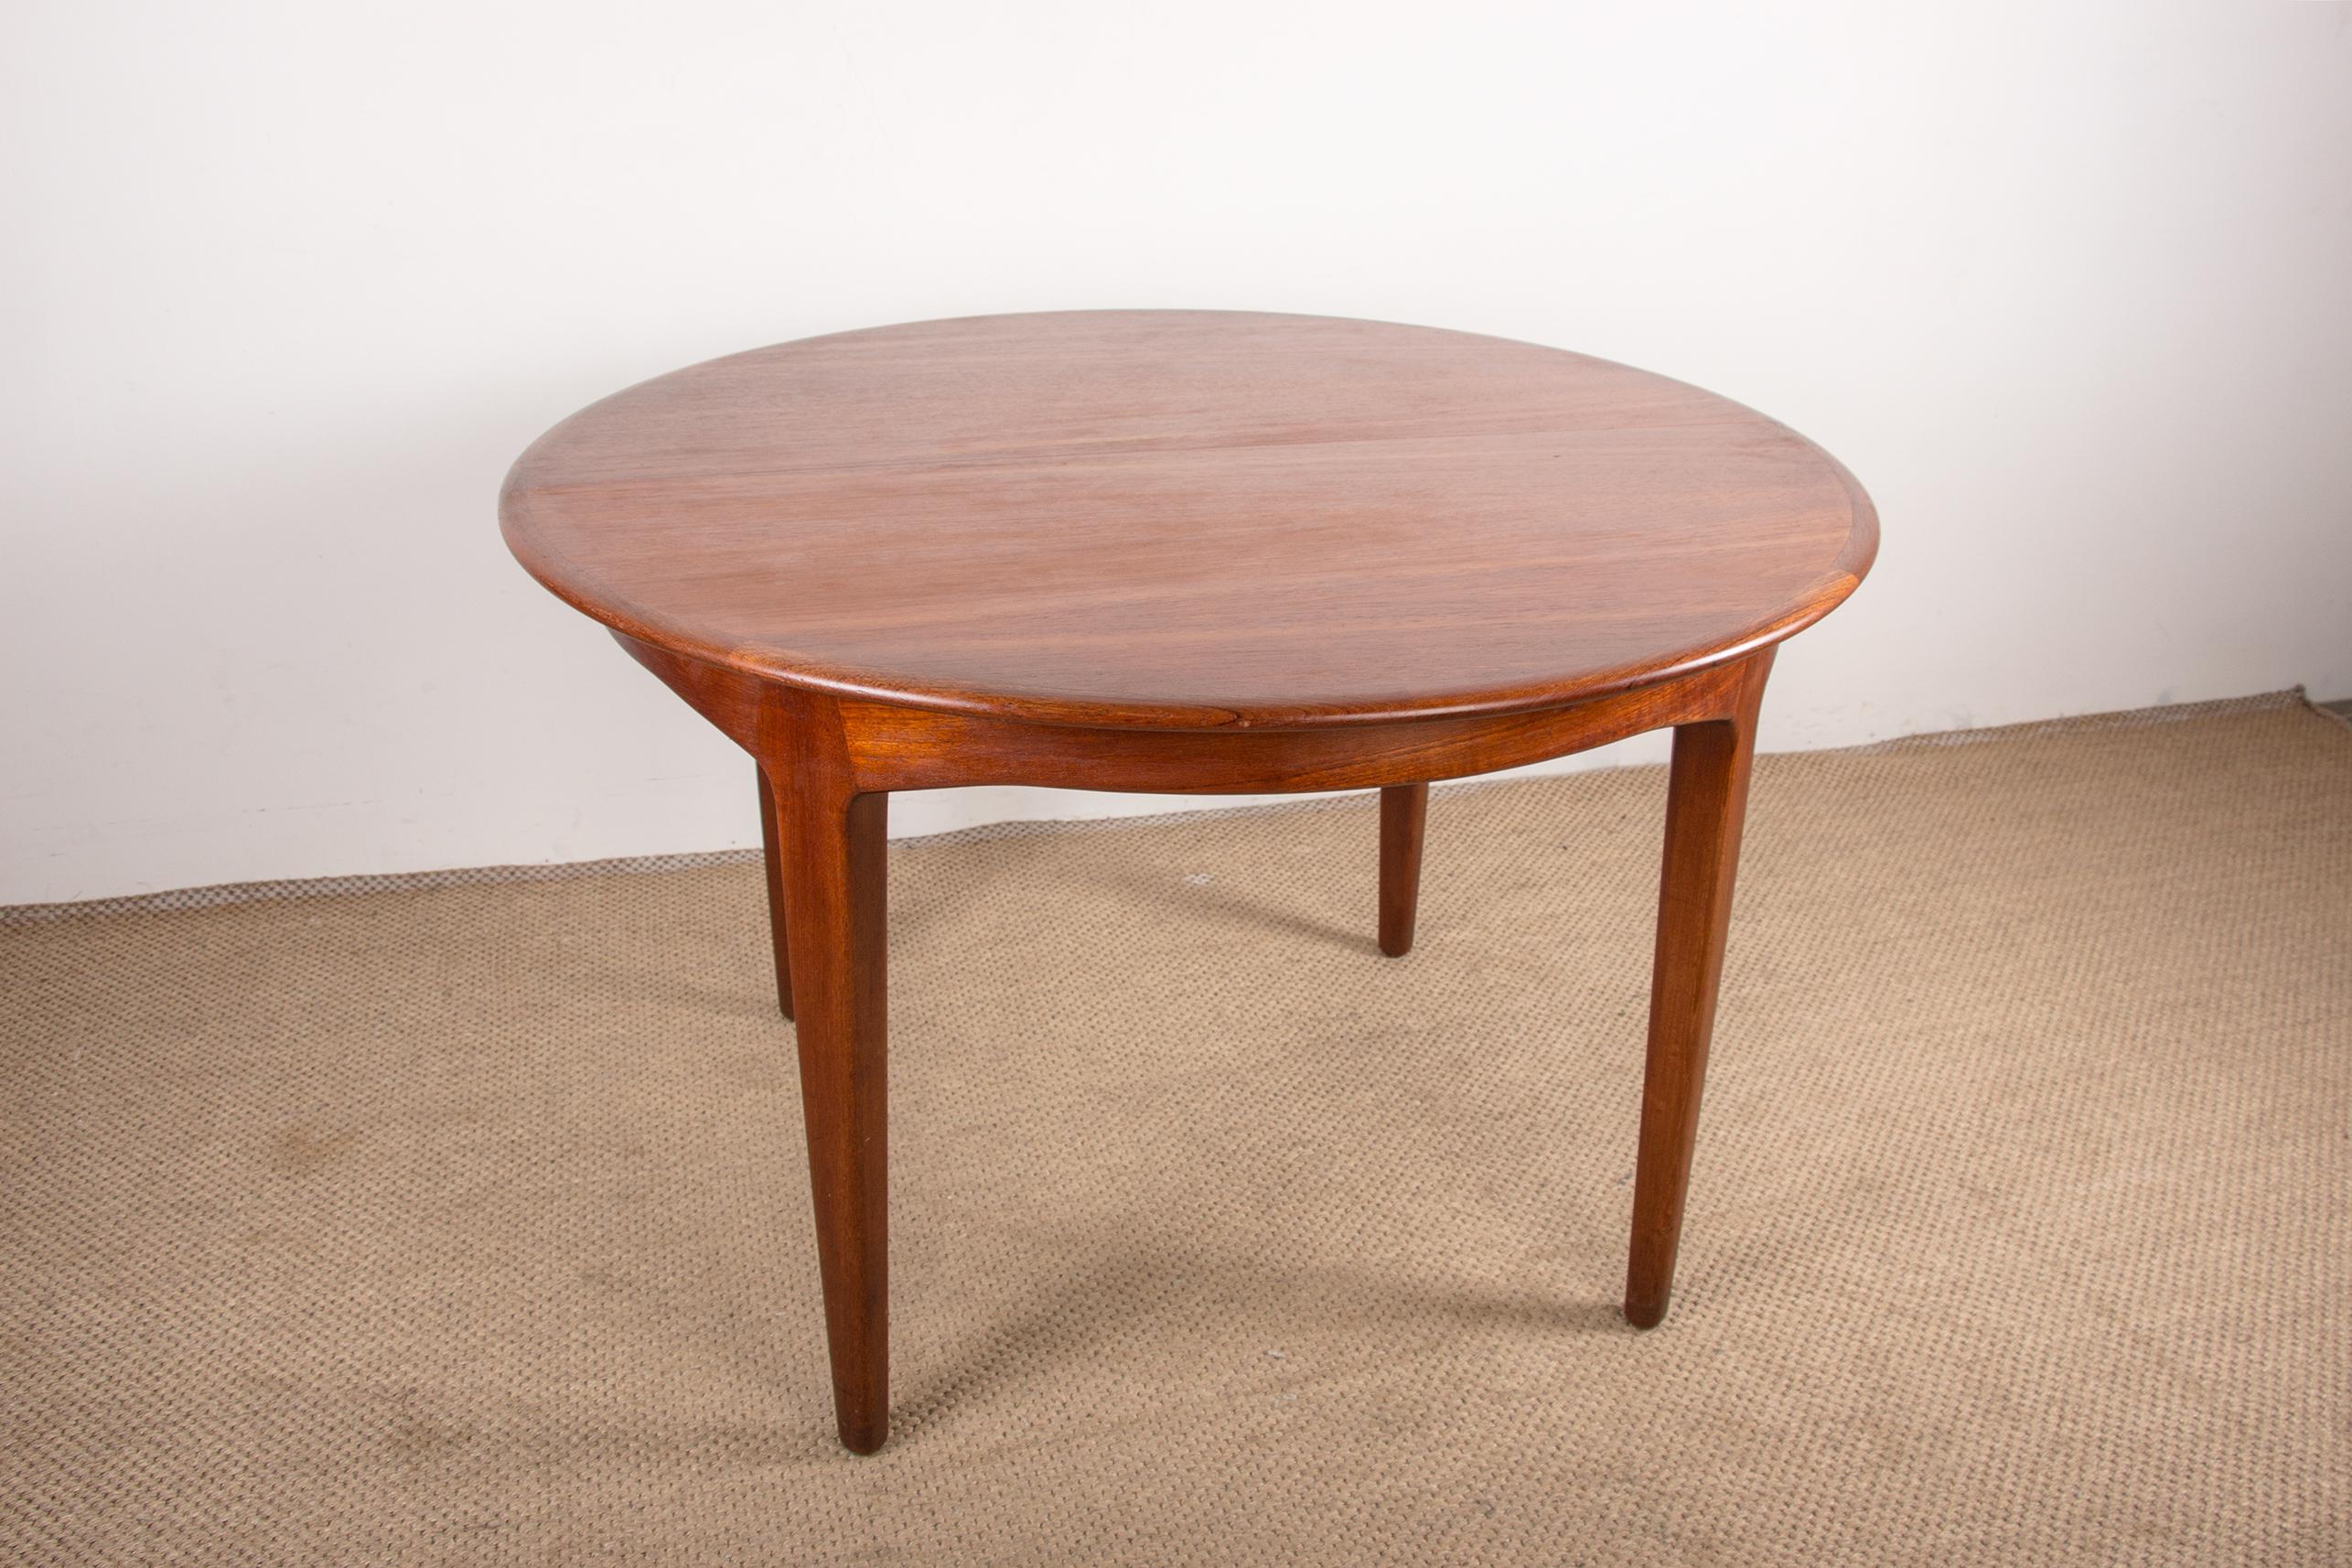 Very large Scandinavian dining room table with its three extensions (including one with a full edge) and its removable central leg, it can accommodate up to 12 people. Very good manufacturing quality, beautiful wood grain. Model designed in 1958 and